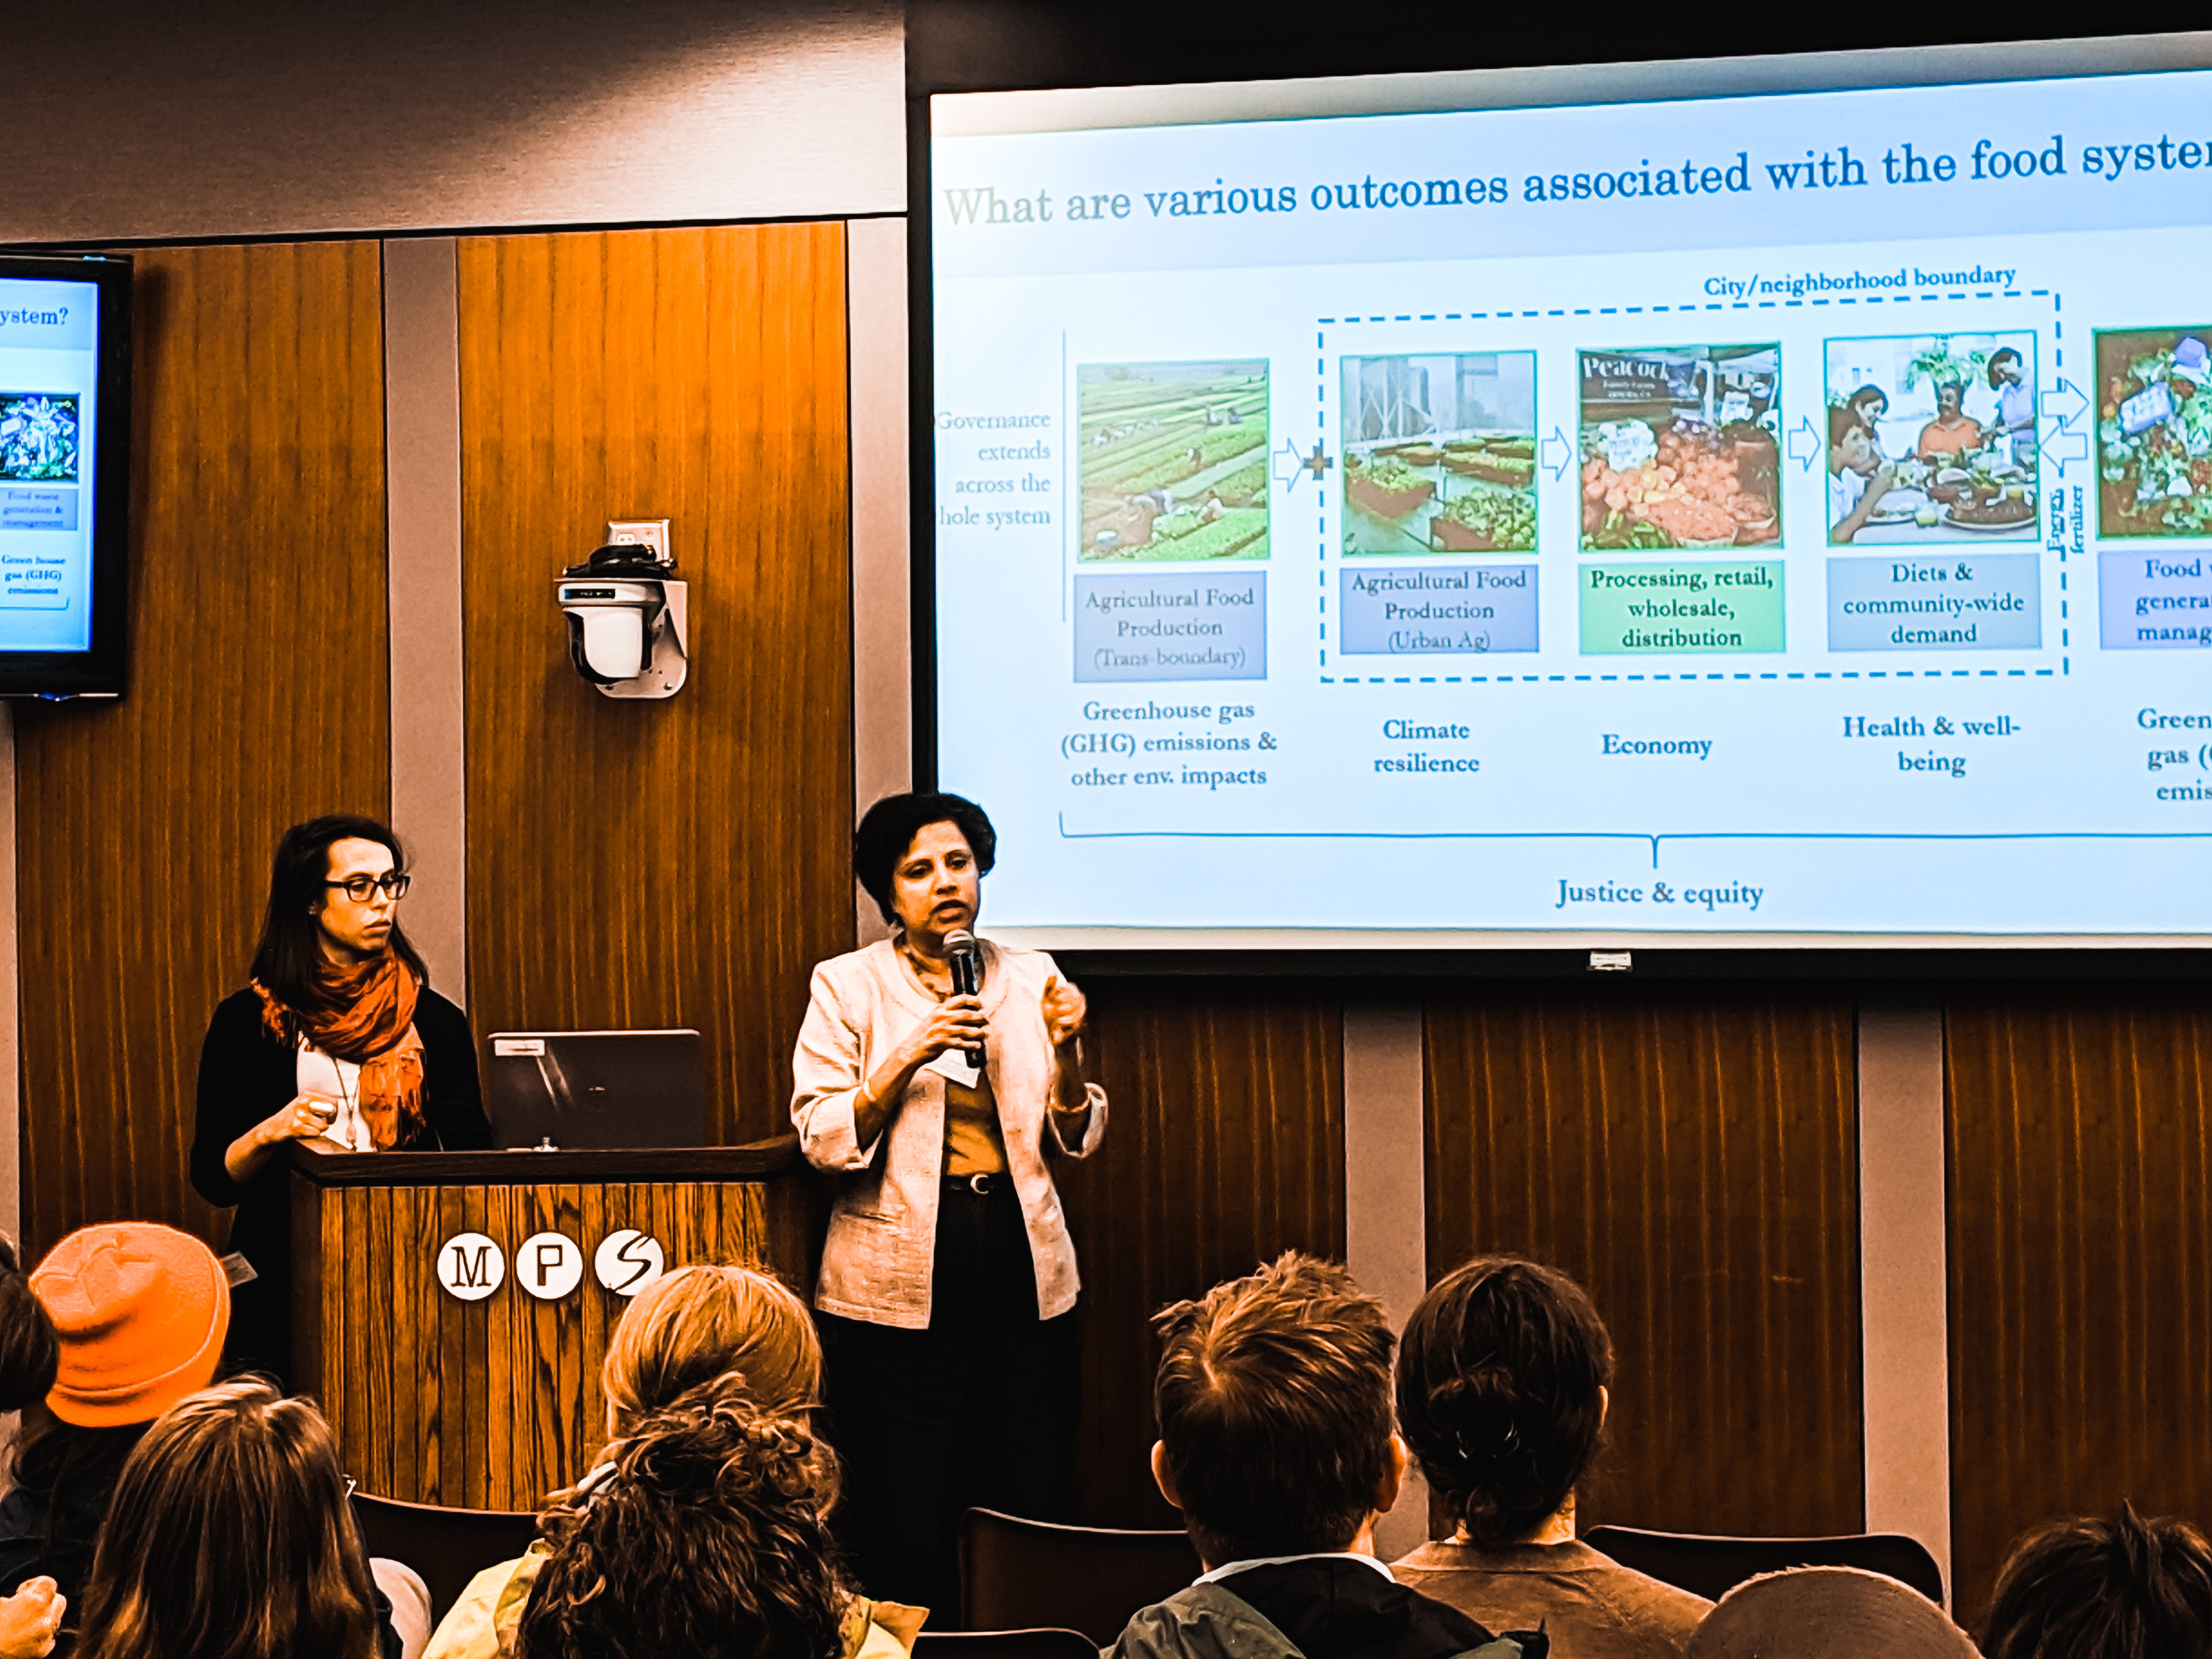 Two researchers present research to a community forum audience.